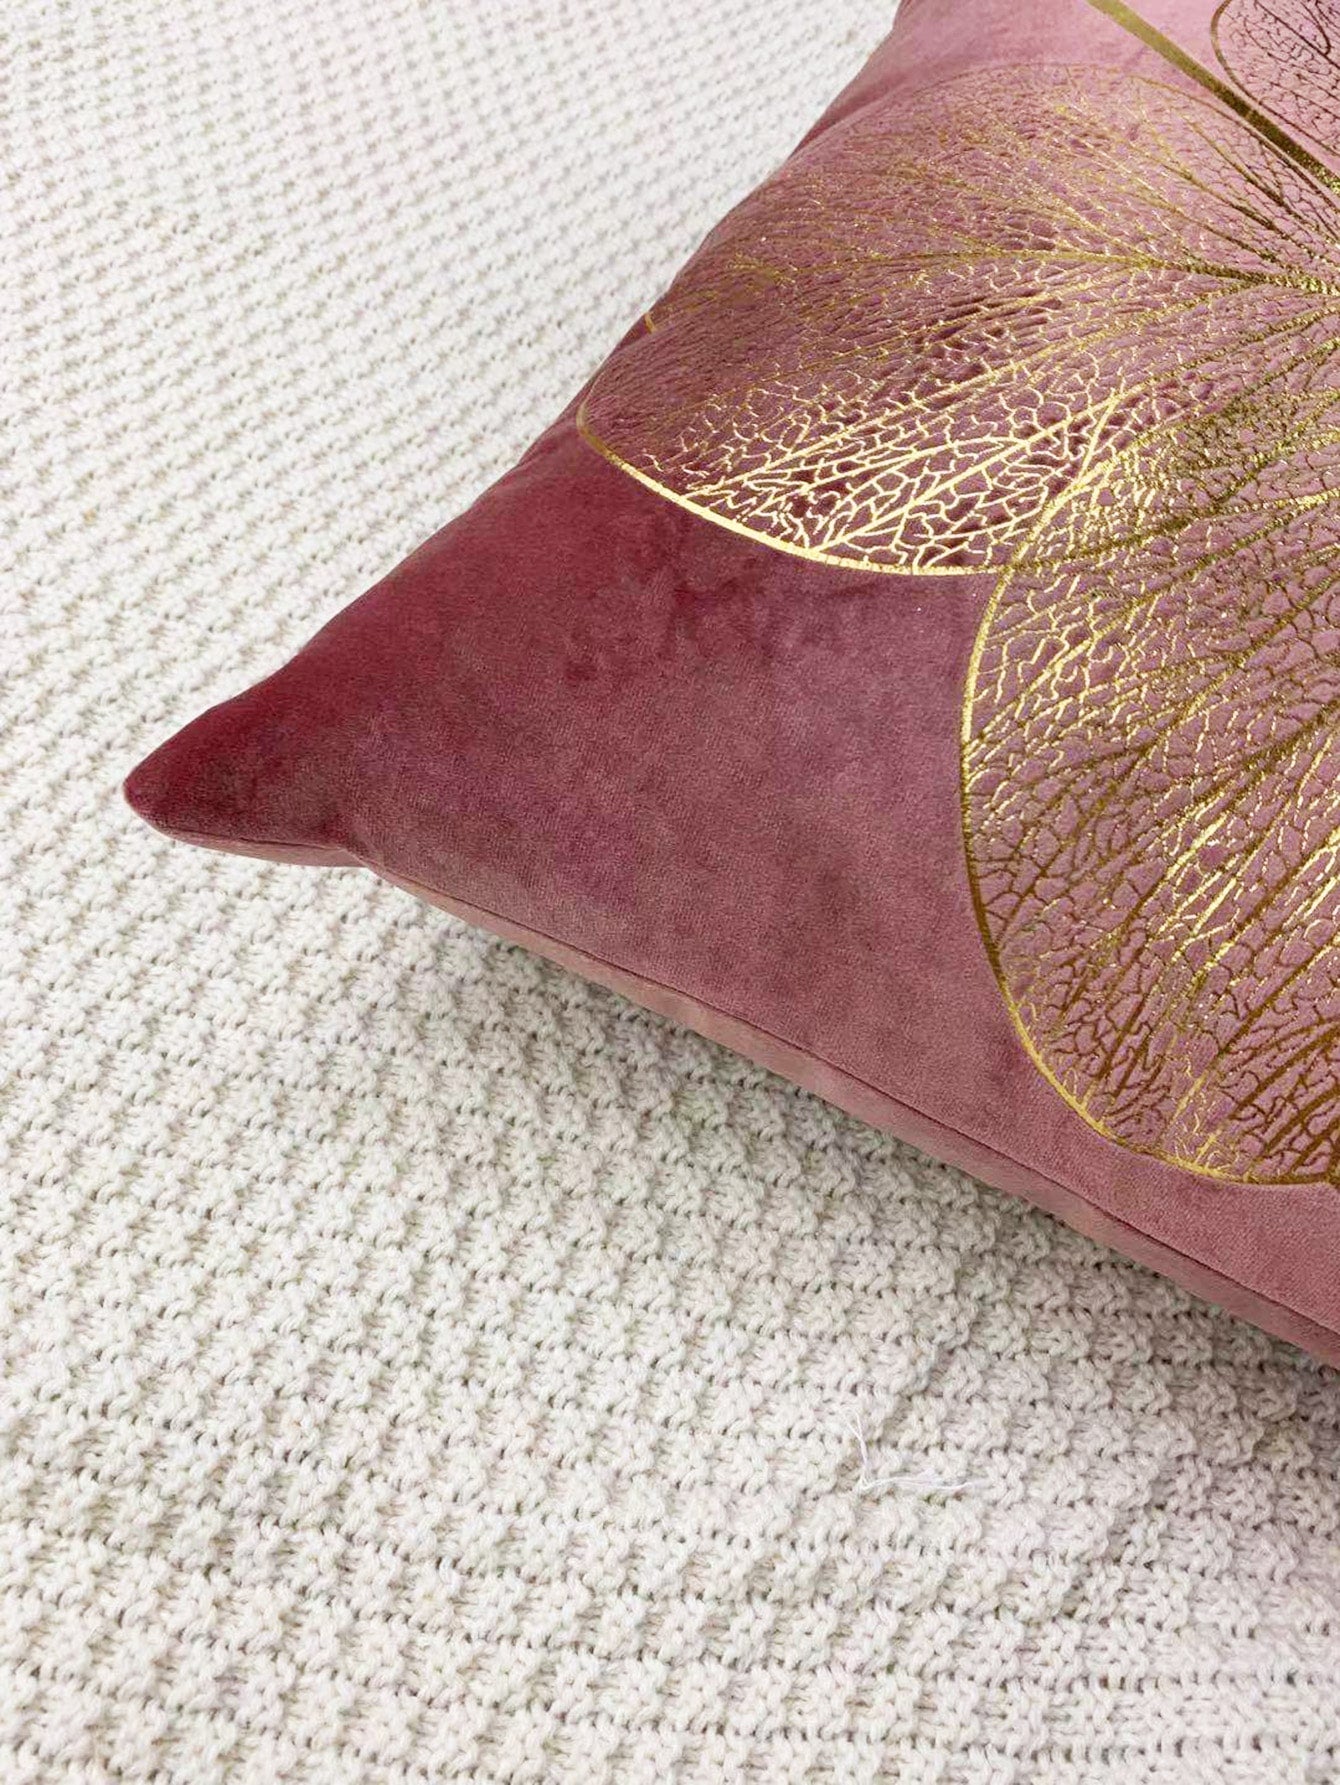 Metallic Leaf Cushion Cover Without Filler